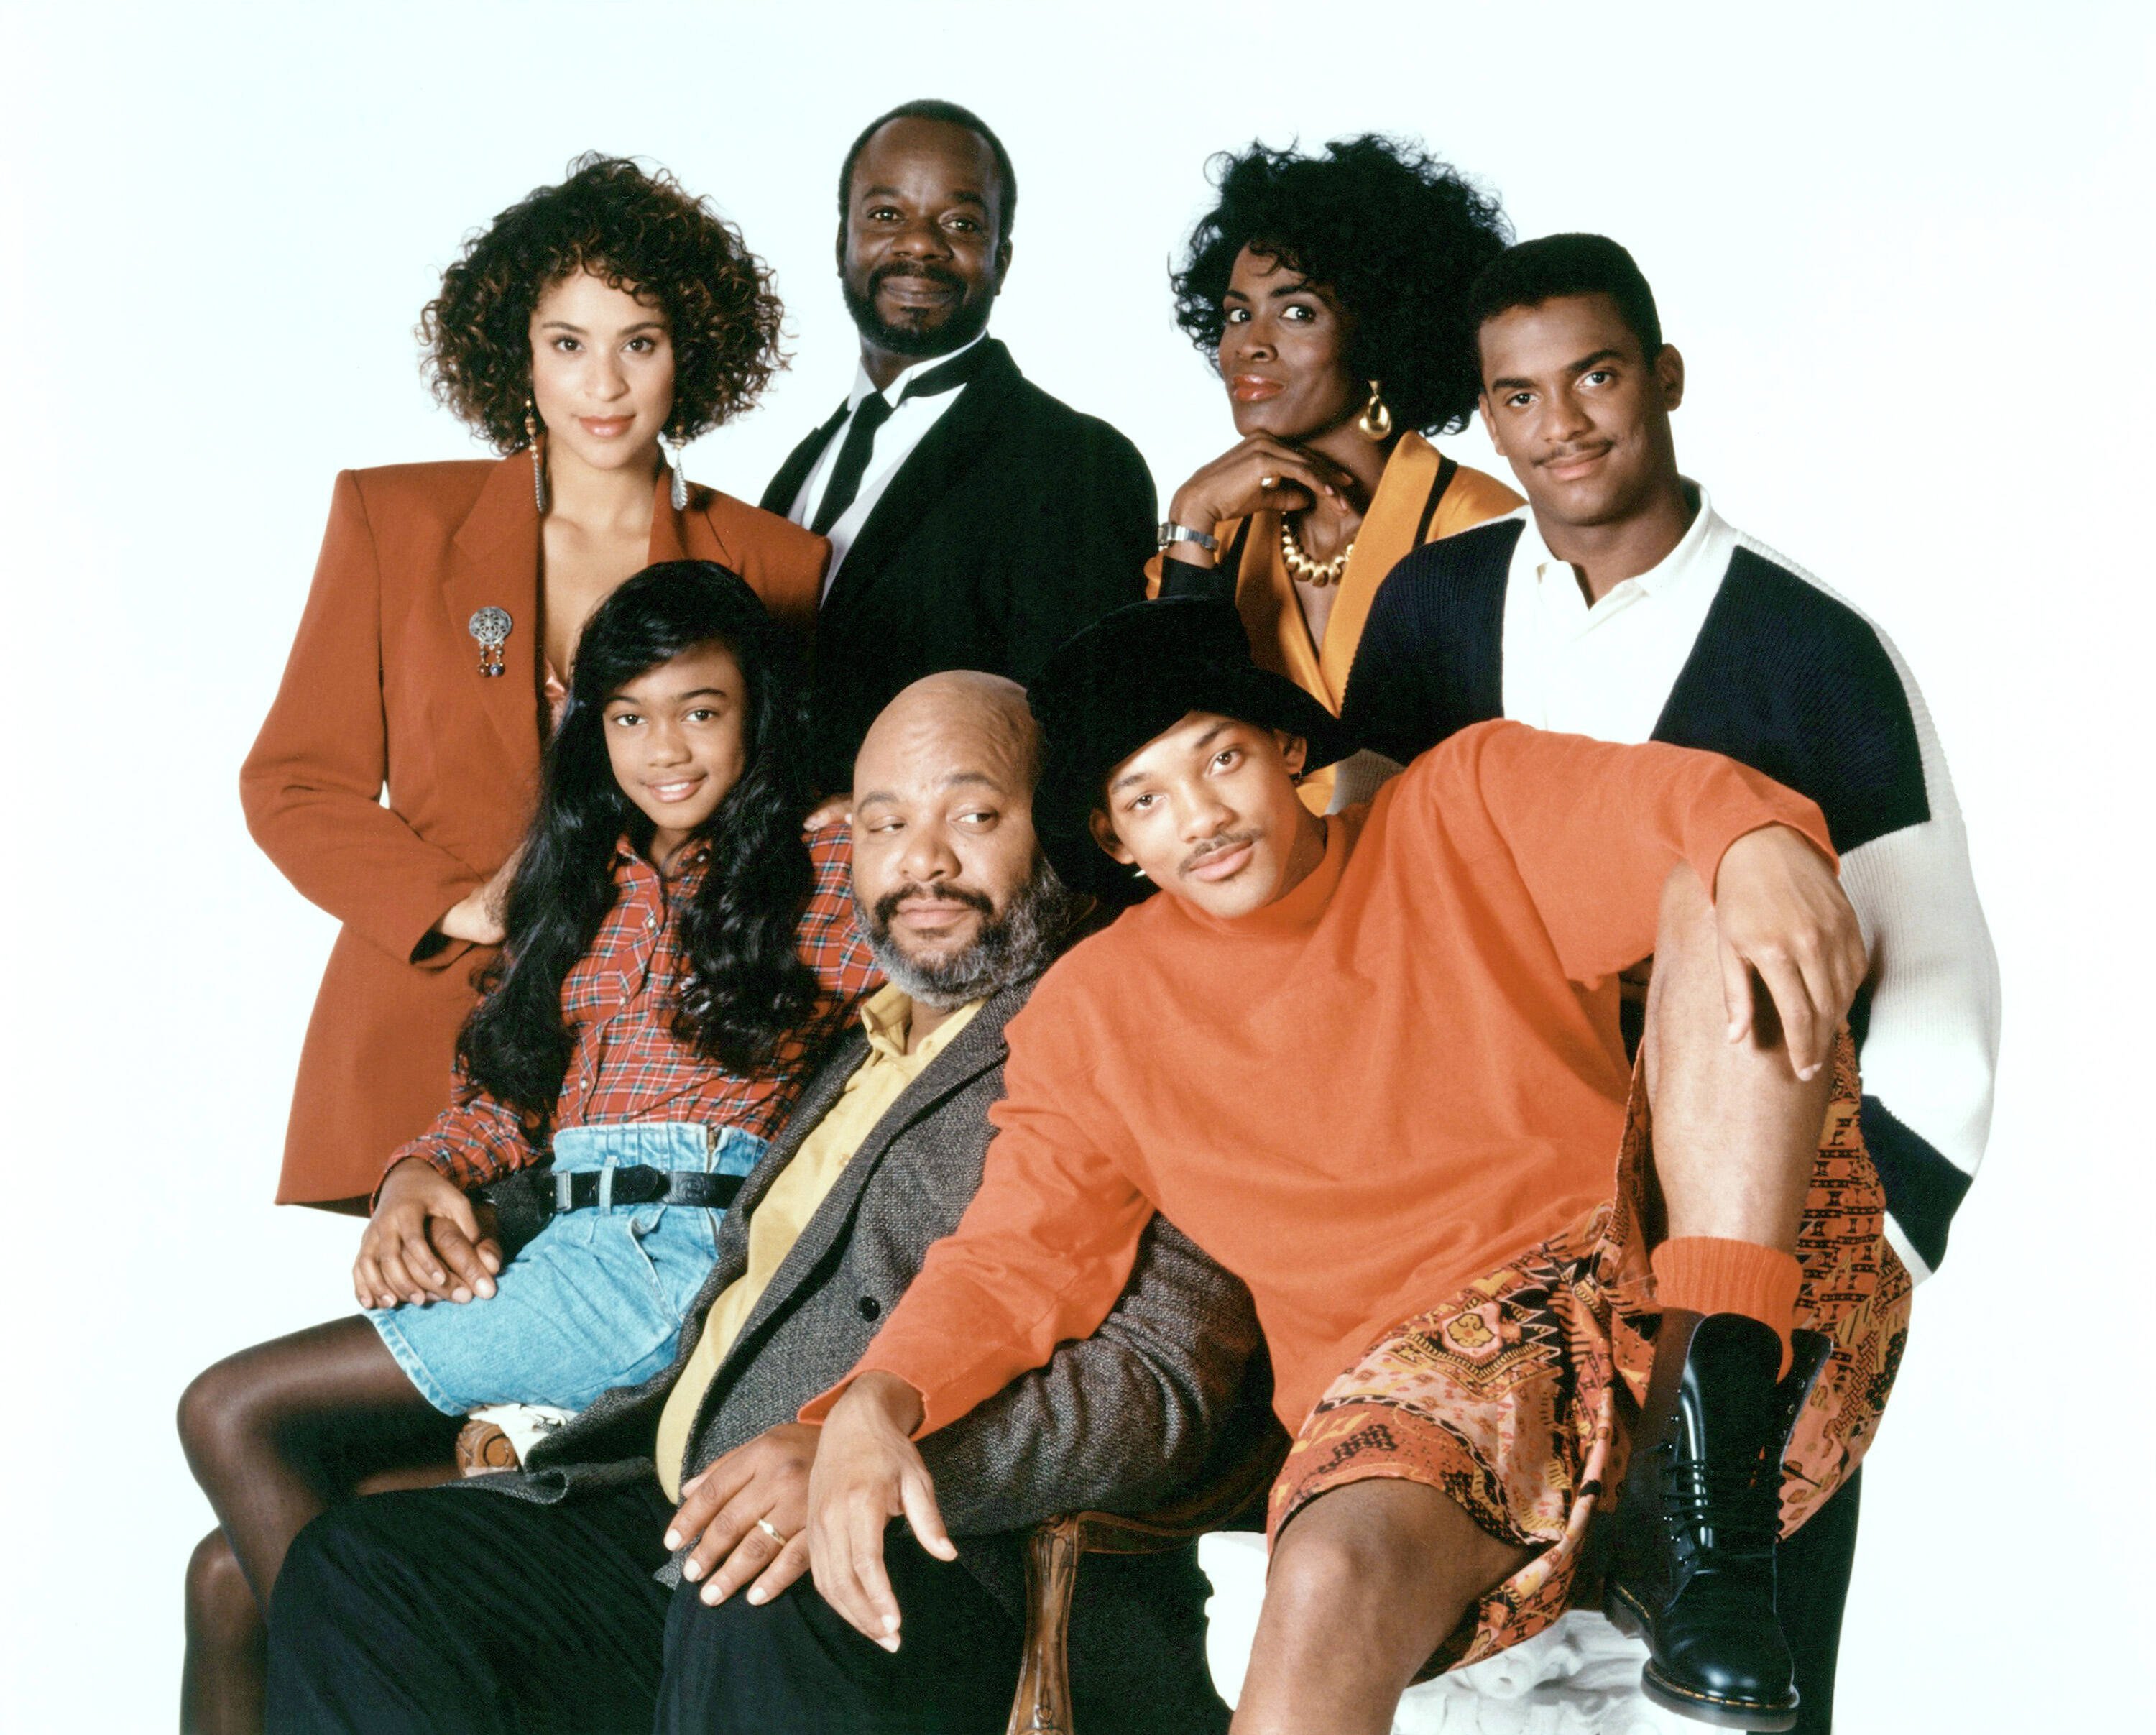 https://cdn2.familie.de/58/44/87/f911d2c79ac477e25c5ce62d94_AzU0ZjFjYTcyNTY5_the-fresh-prince-of-bel-air-front-from-left-tatyana-ali-james-avery-will-smith-back-karyn-par.jpg